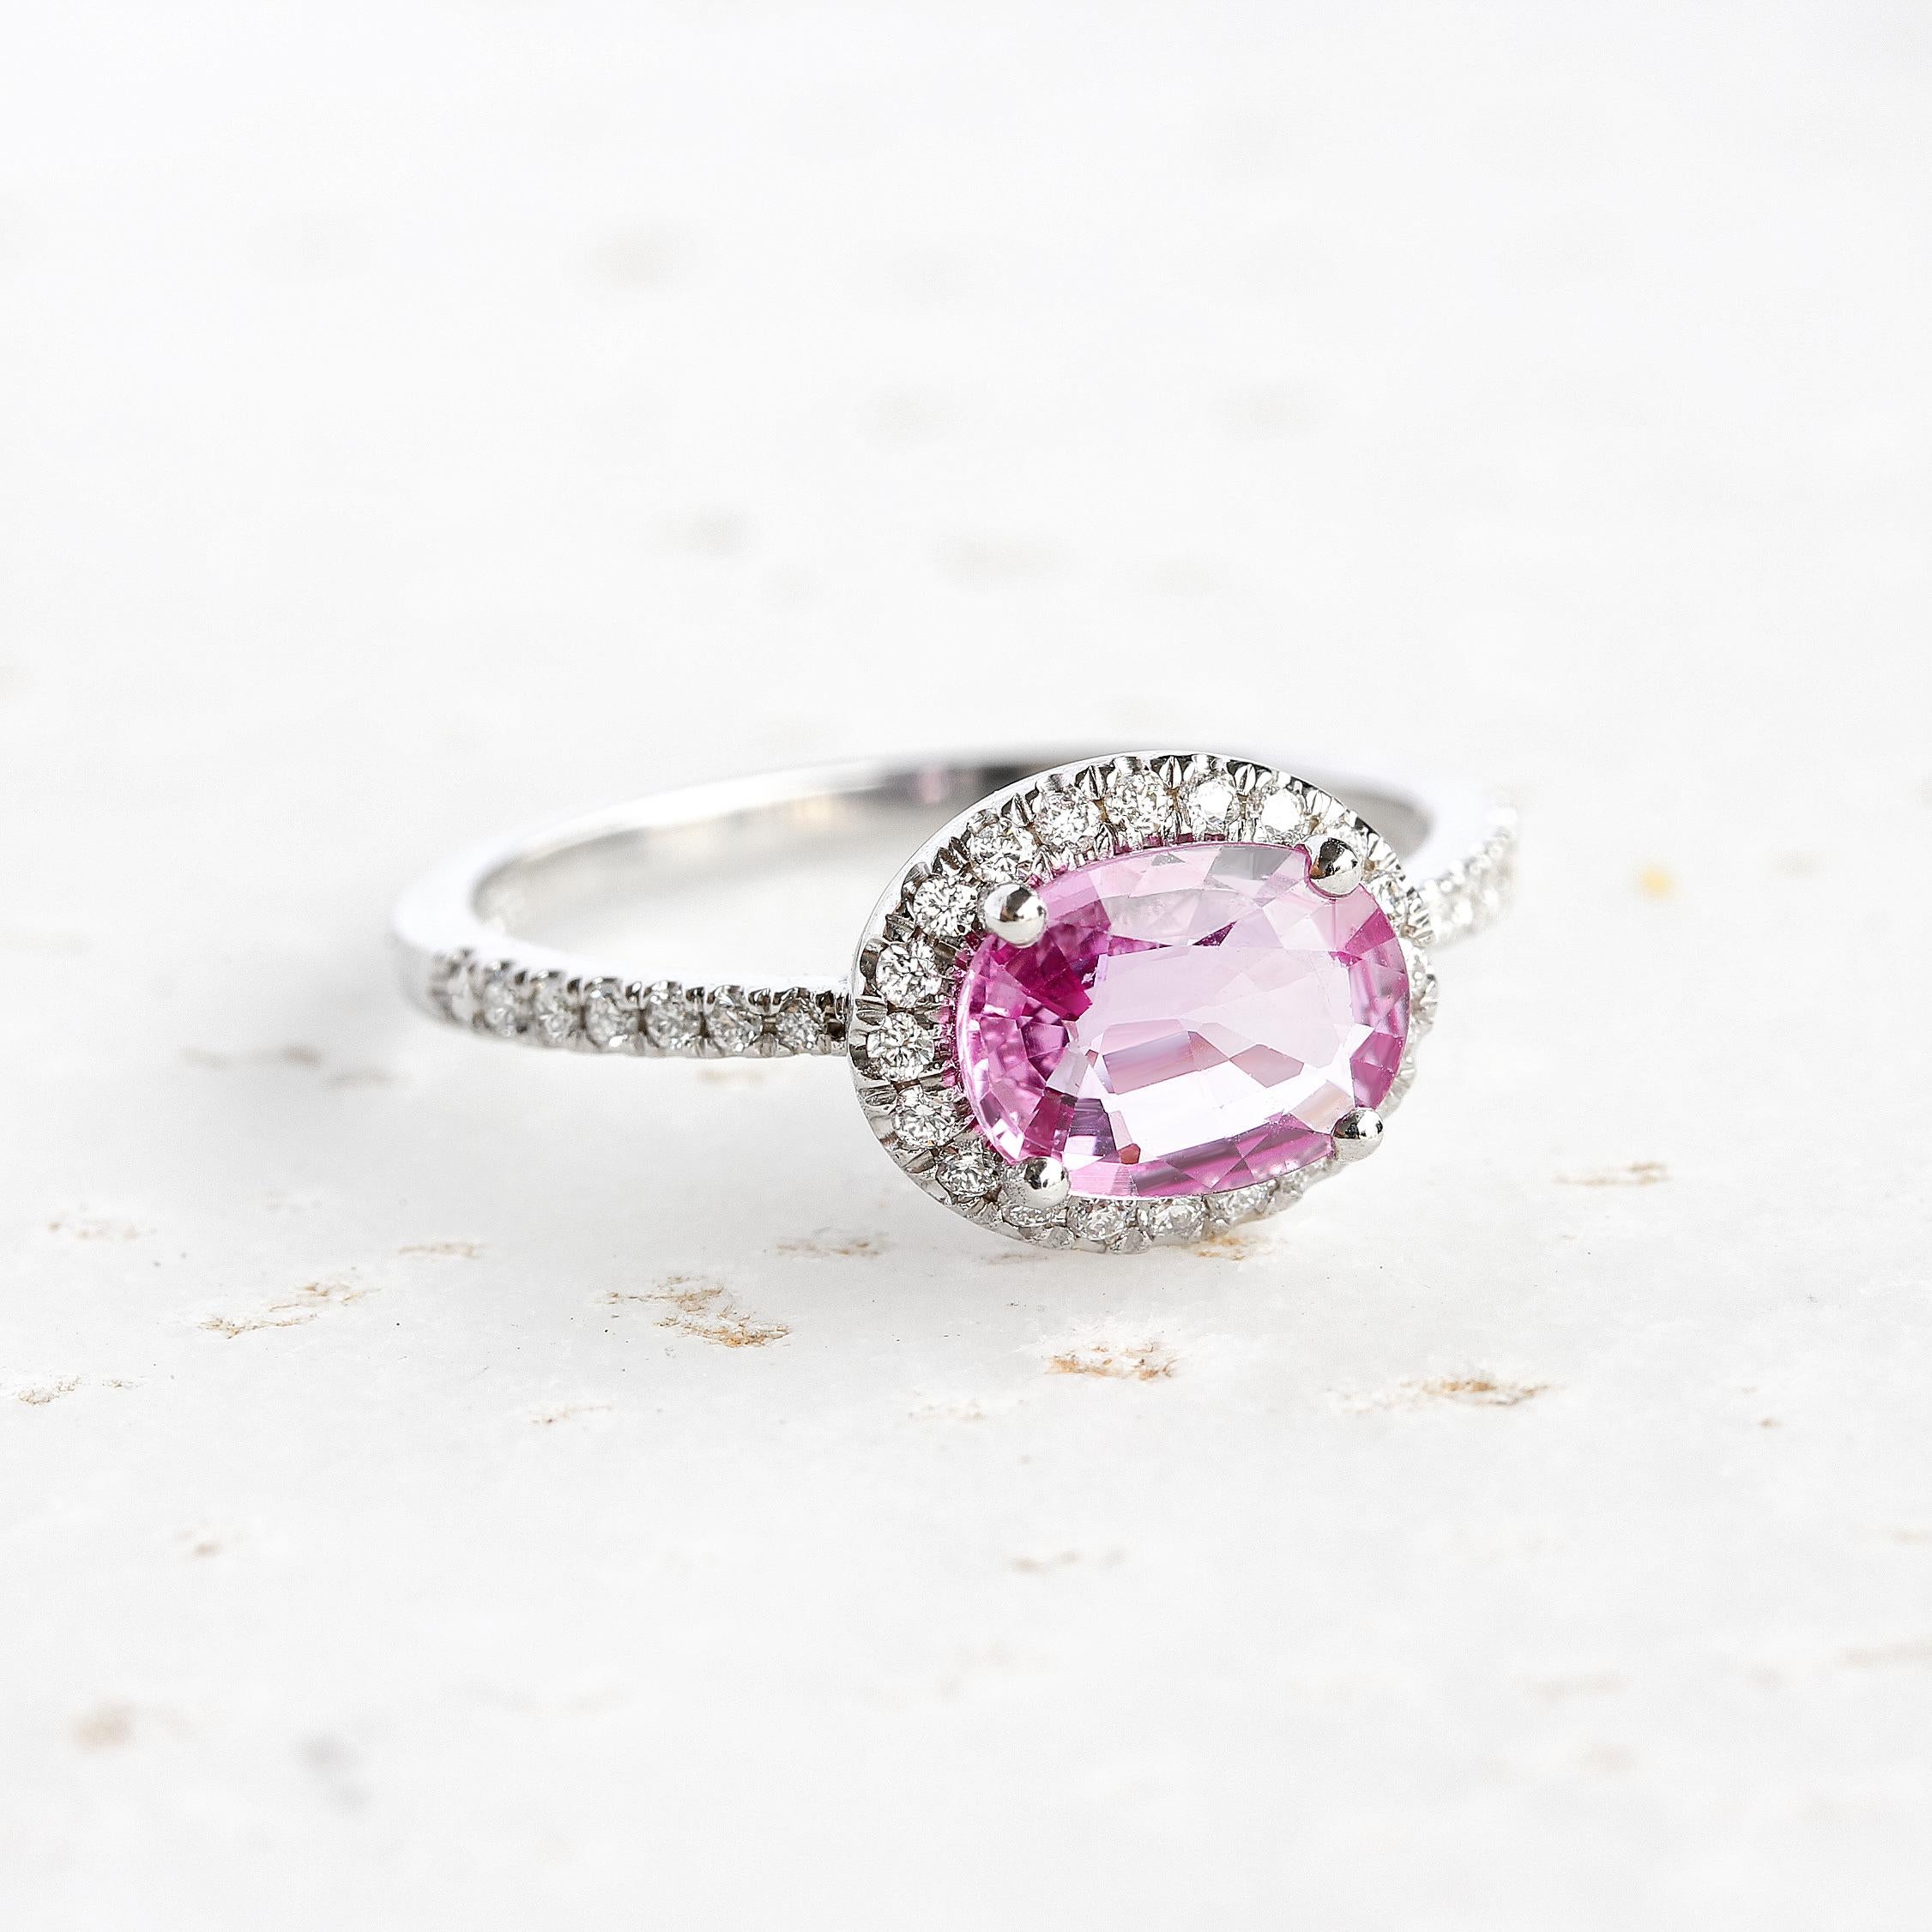 East-West Unique Oval Set Pink Sapphire & Diamond Halo Ring - Ivy.
The Center stone can be customized.
An original design by Silly Shiny Diamonds.
This list is for the engagement ring only.

Details:
* Center stone shape: Oval.
* Center stone type: